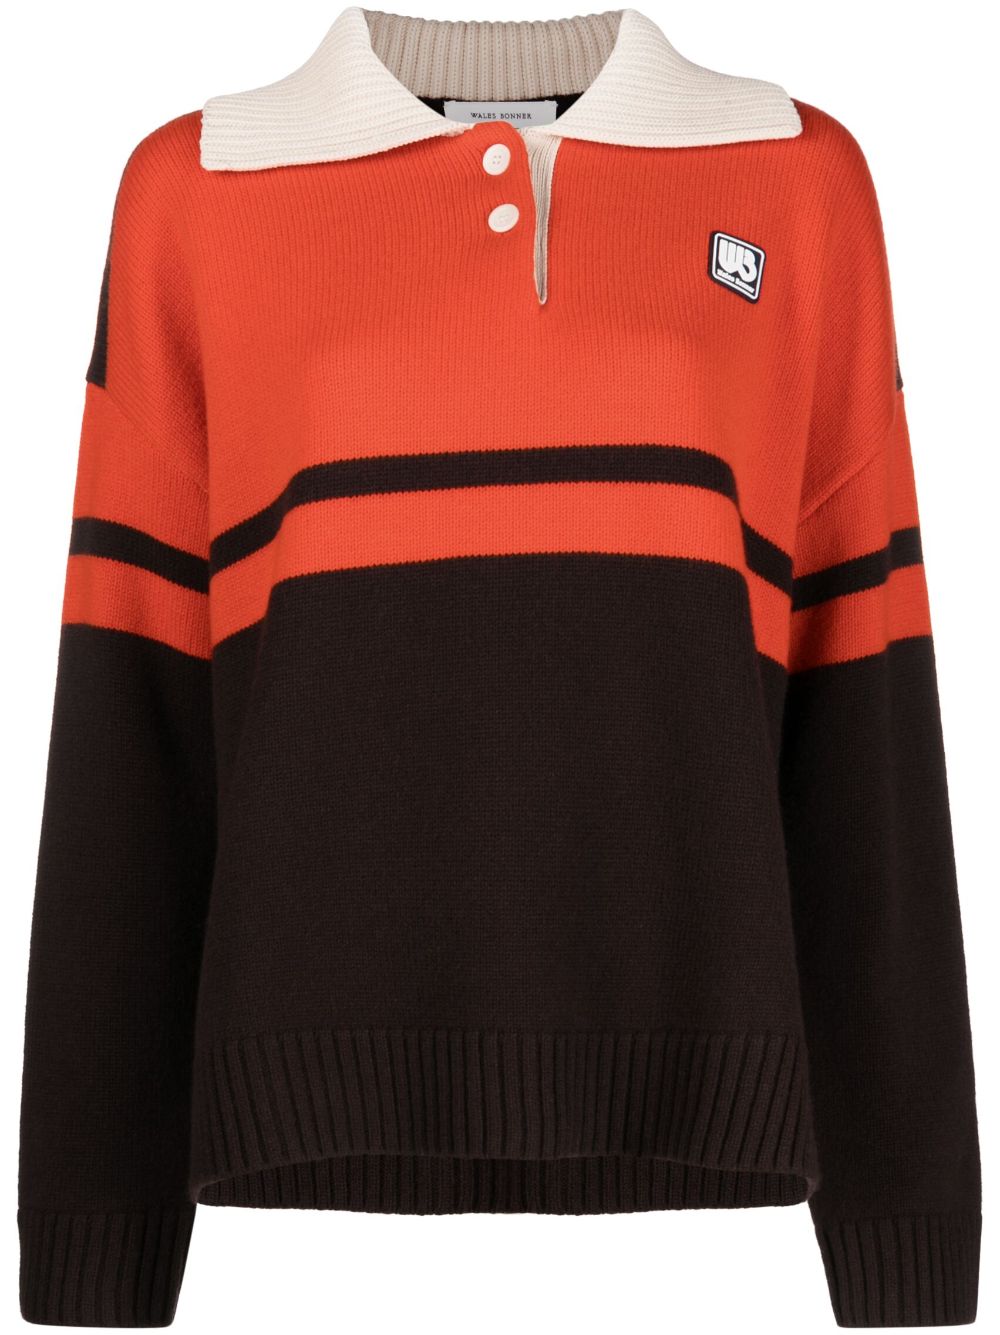 WALES BONNER-CALM POLO-WA23KN02 KN04 934 RED BLACK AND BEIGE